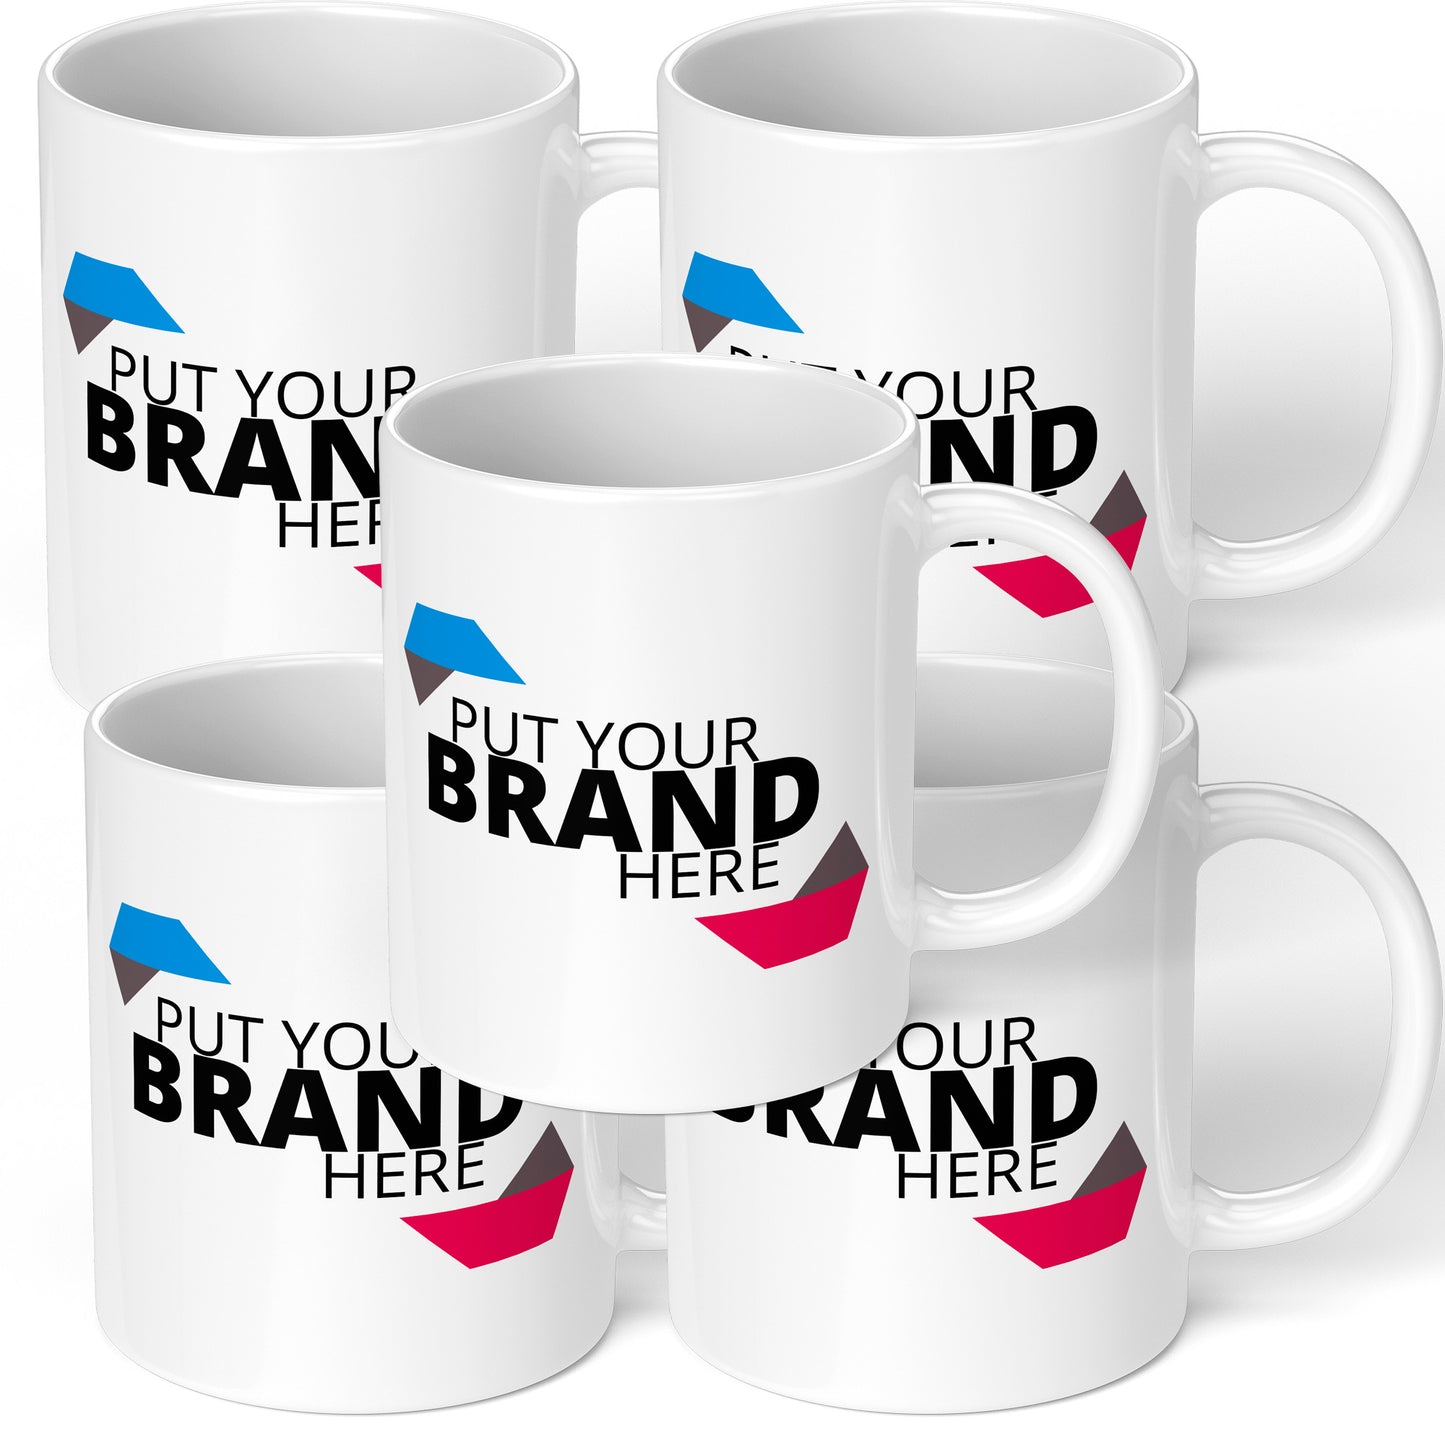 £1.66 Bulk Branded Mugs (WHITE) - Fully Inclusive Pricing Full Colour Both Sides &  Free Delivery